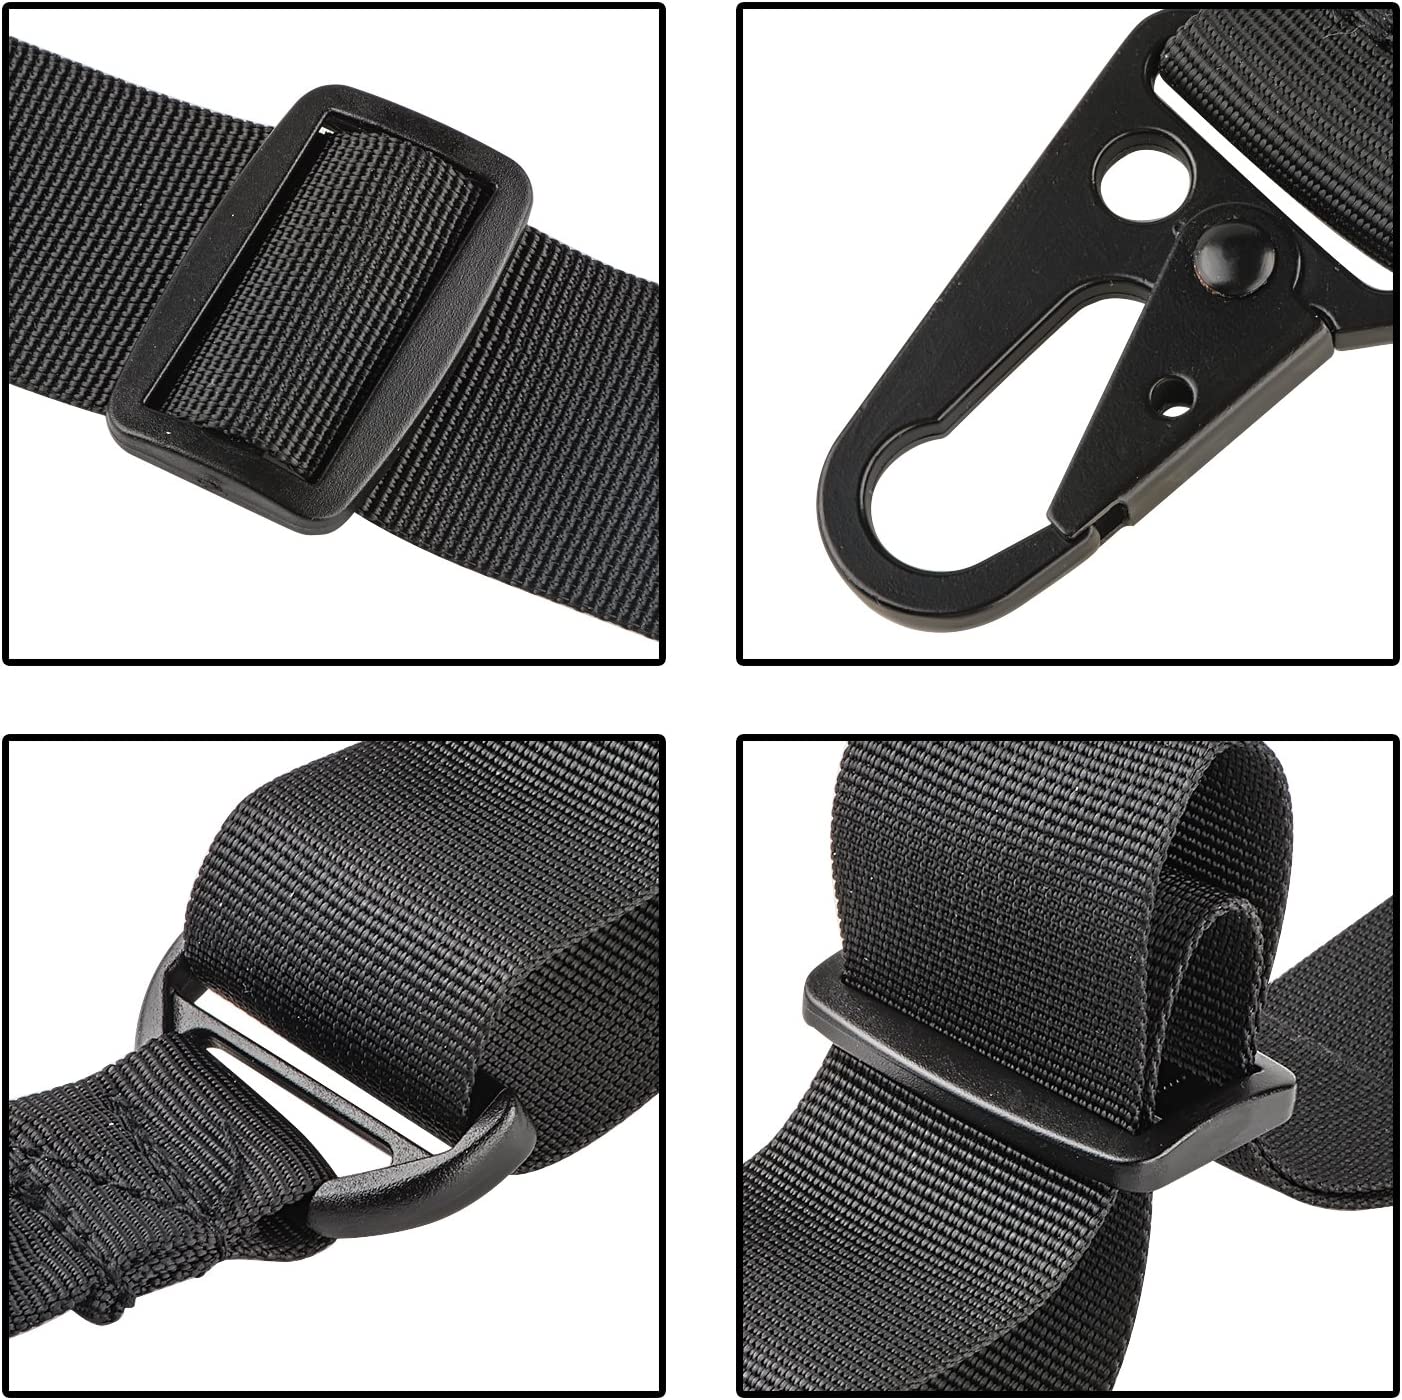 2 POINT TACTICAL NYLON SLING W/ CLASH-CLIPS